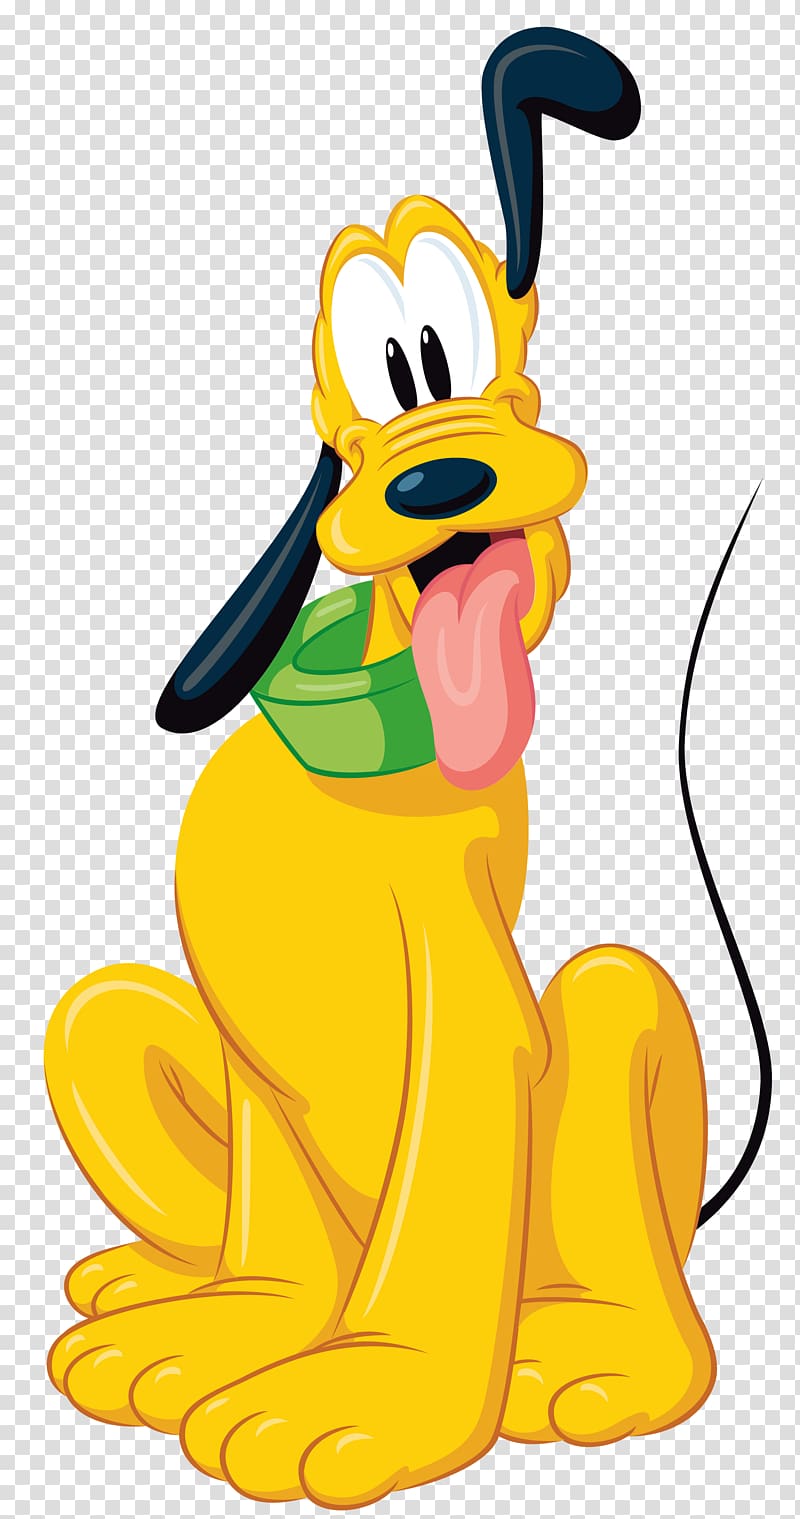 Pluto Mickey Mouse Minnie Mouse Goofy Donald Duck, Pluto Disney Cartoon, Pluto transparent background PNG clipart